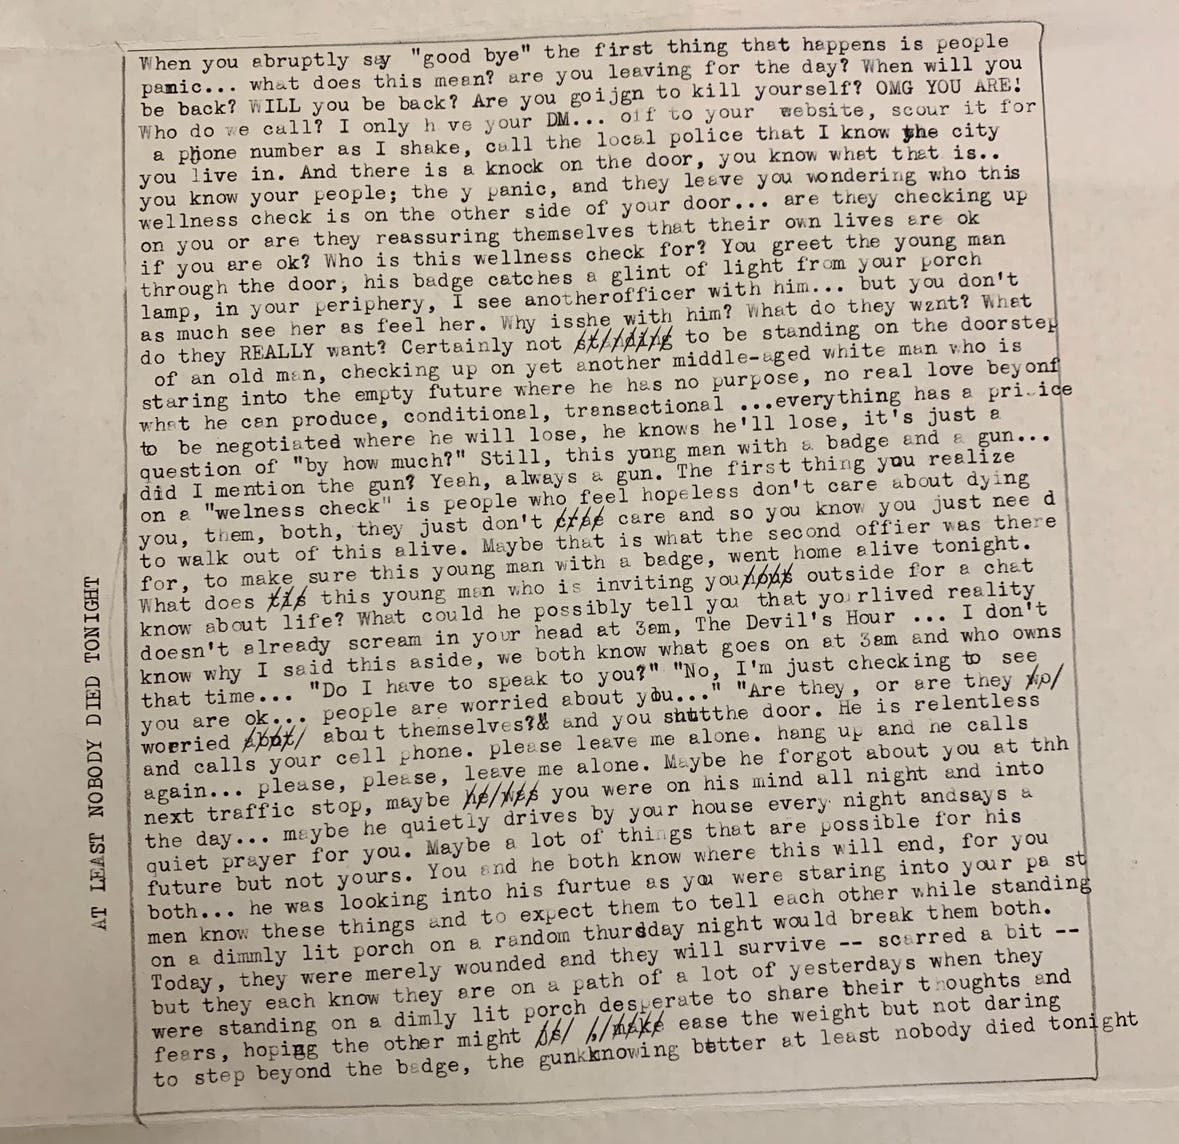 A scan of the pysical media of the essay that is transcribed below on the page. This is not supposed to be consumed alone, but with the transcription. IF you see this alone, go to gerardmclean.substack.com and search At Least Nobody Died Tonight. Please. Words and pictures go together.